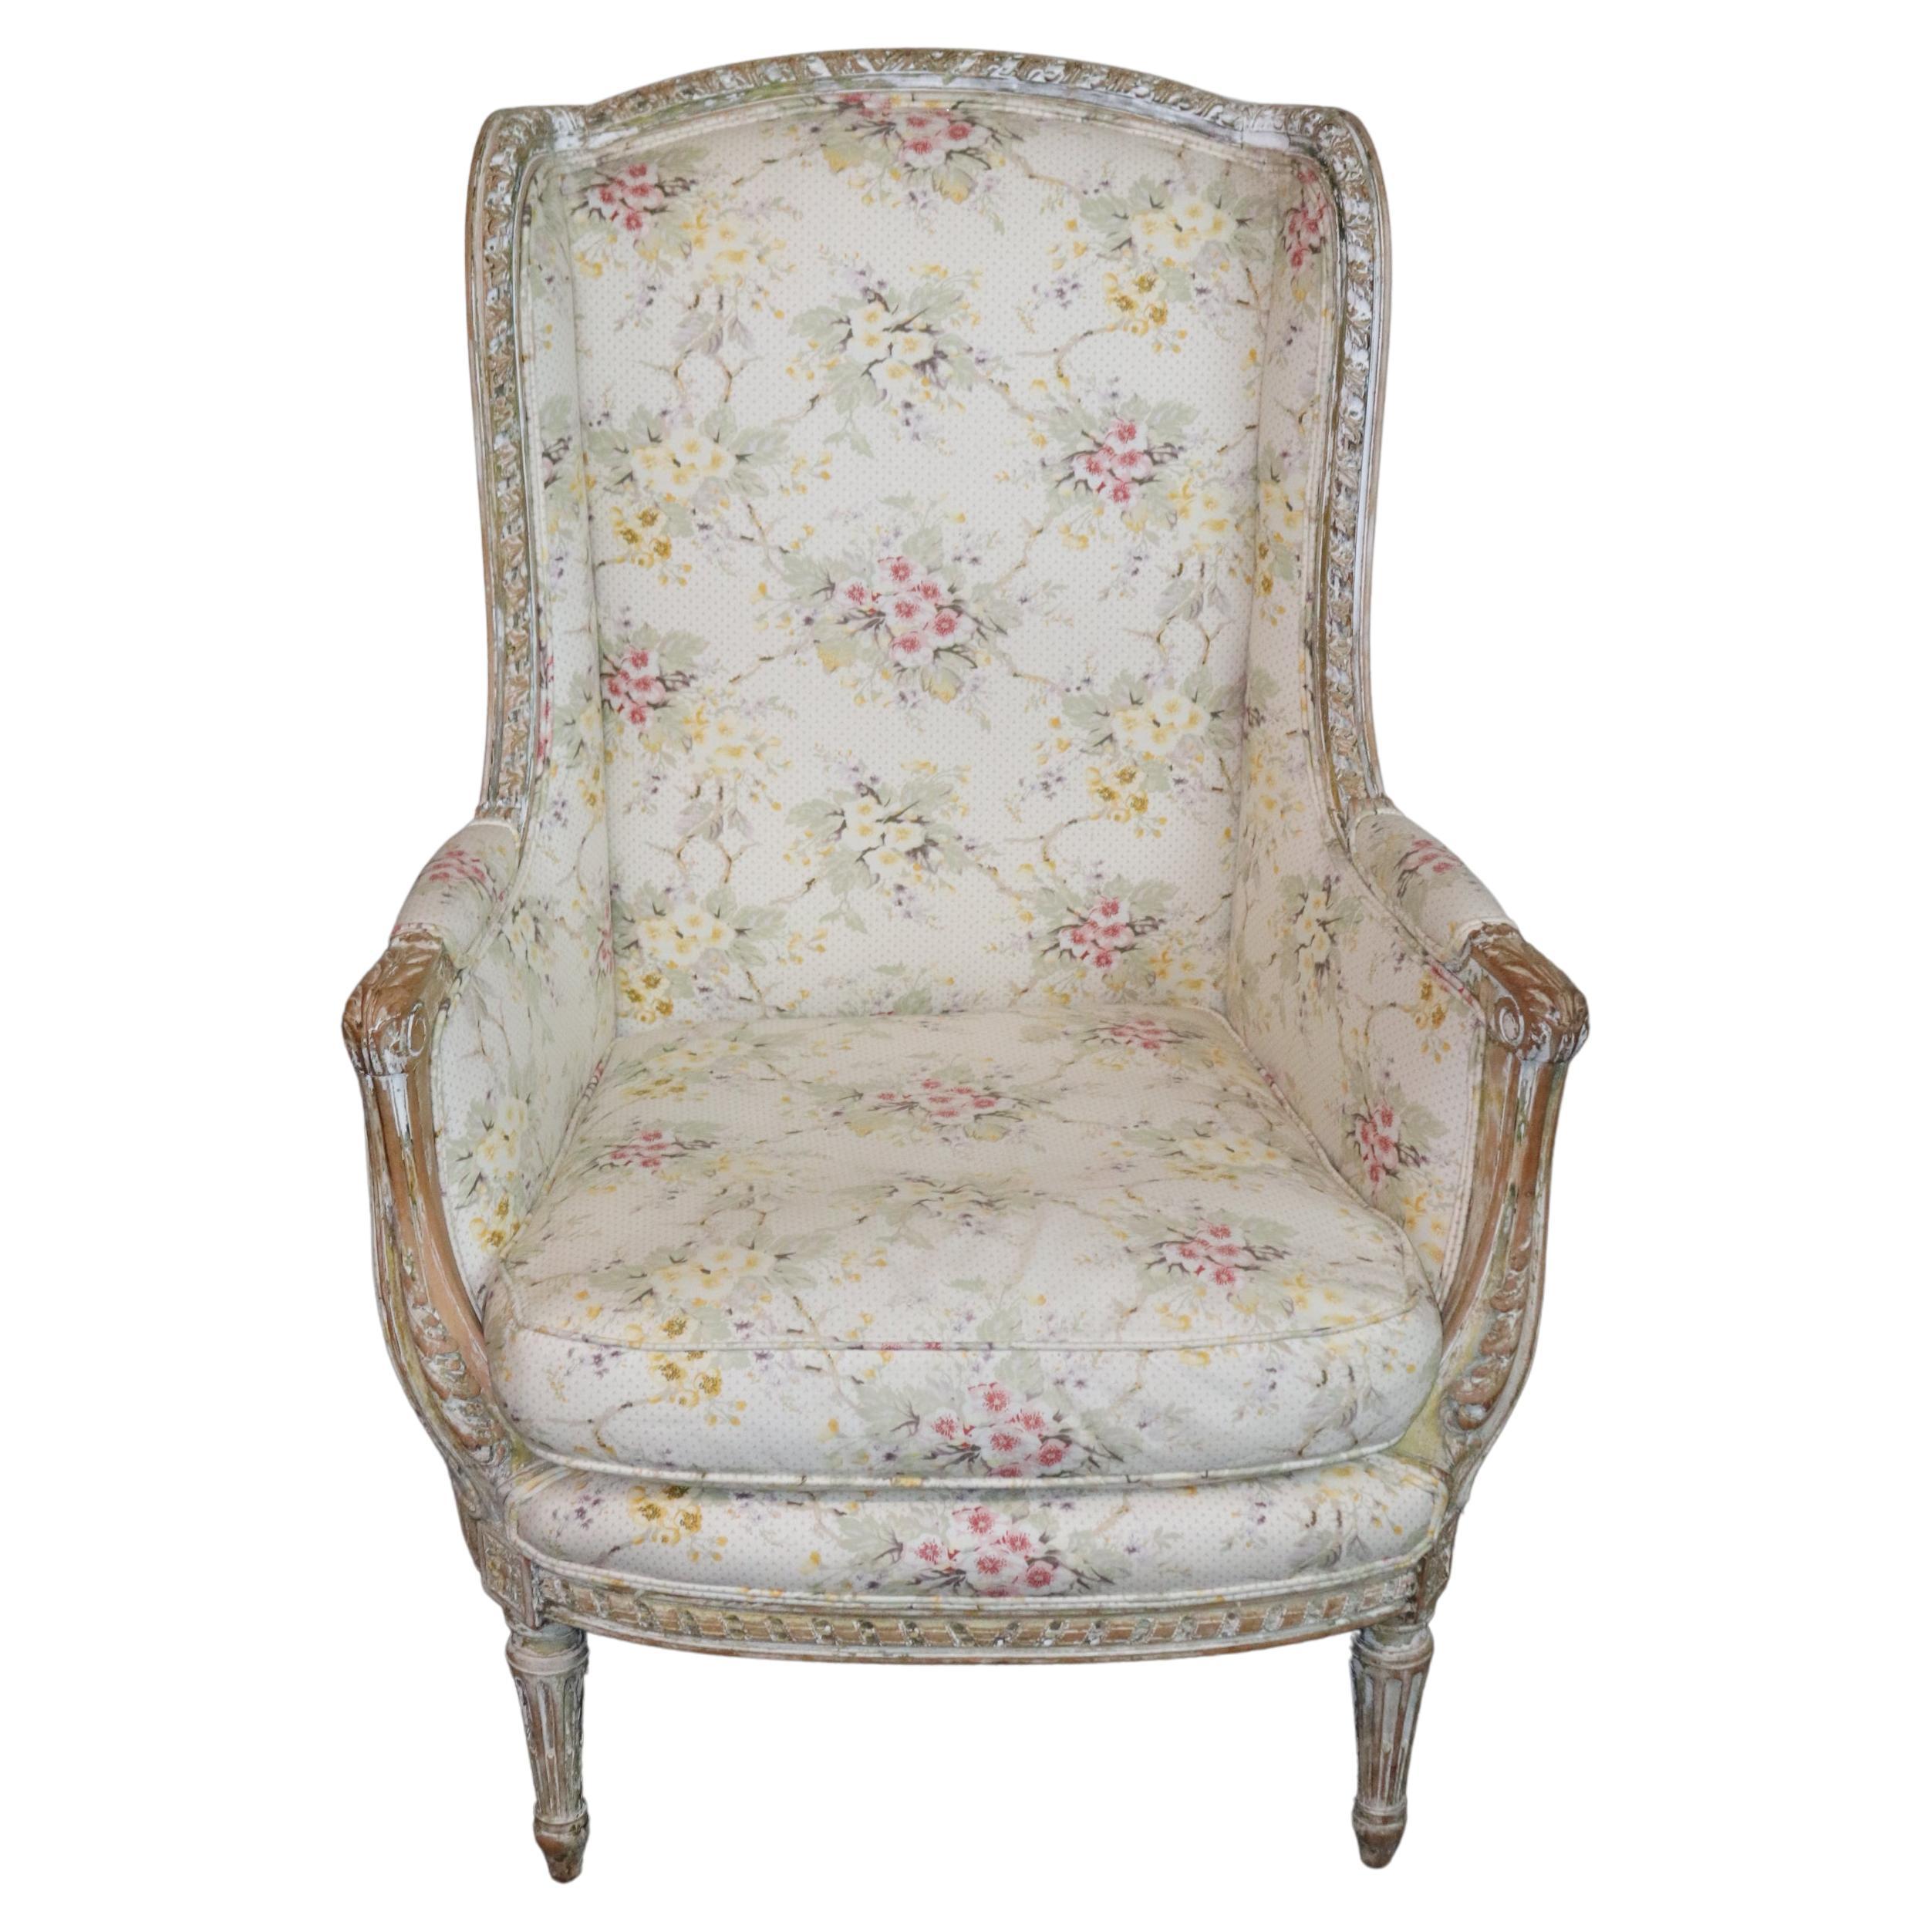 This is a superb white painted with a time-worn distressed finish that reveals the beautiful walnut through the original white paint. The color-keyed upholstery is beautiful and in good original conditon. There will be signs of age and wear on the